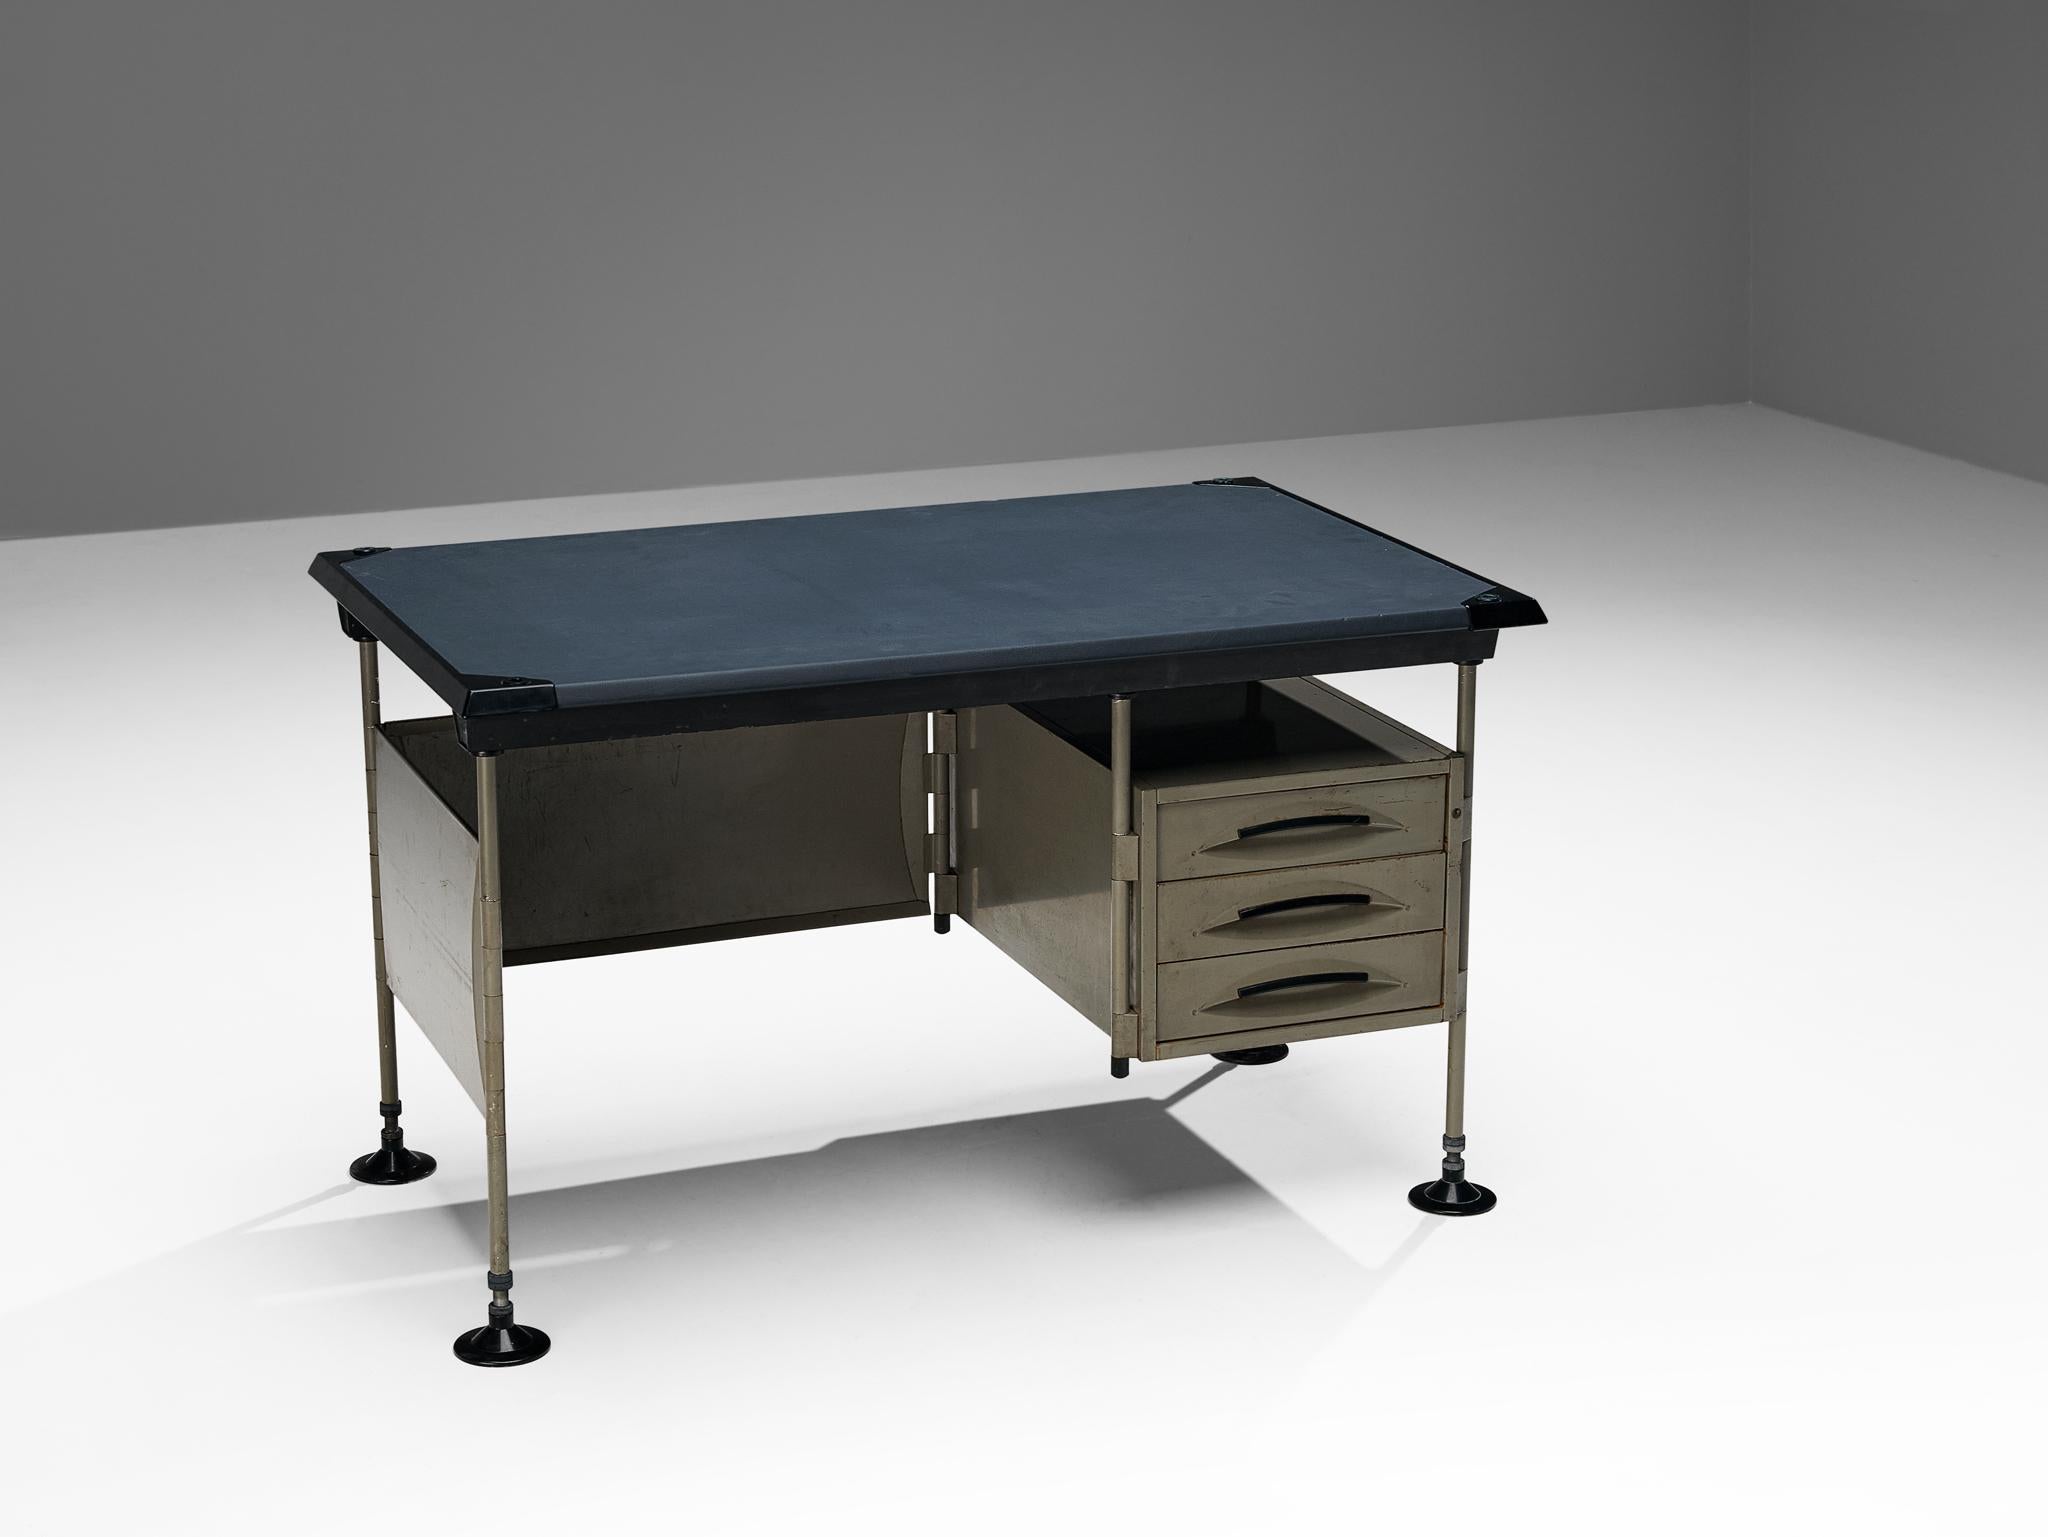 Studio B.B.P.R. for Olivetti, 'Spazio' desk with drawers, metal, vinyl, plastic, Italy, circa 1960 

This industrial 'Spazio' desk is designed by Studio B.B.P.R. A black vinyl tabletop combines wonderfully with the metal base in soft green/grey